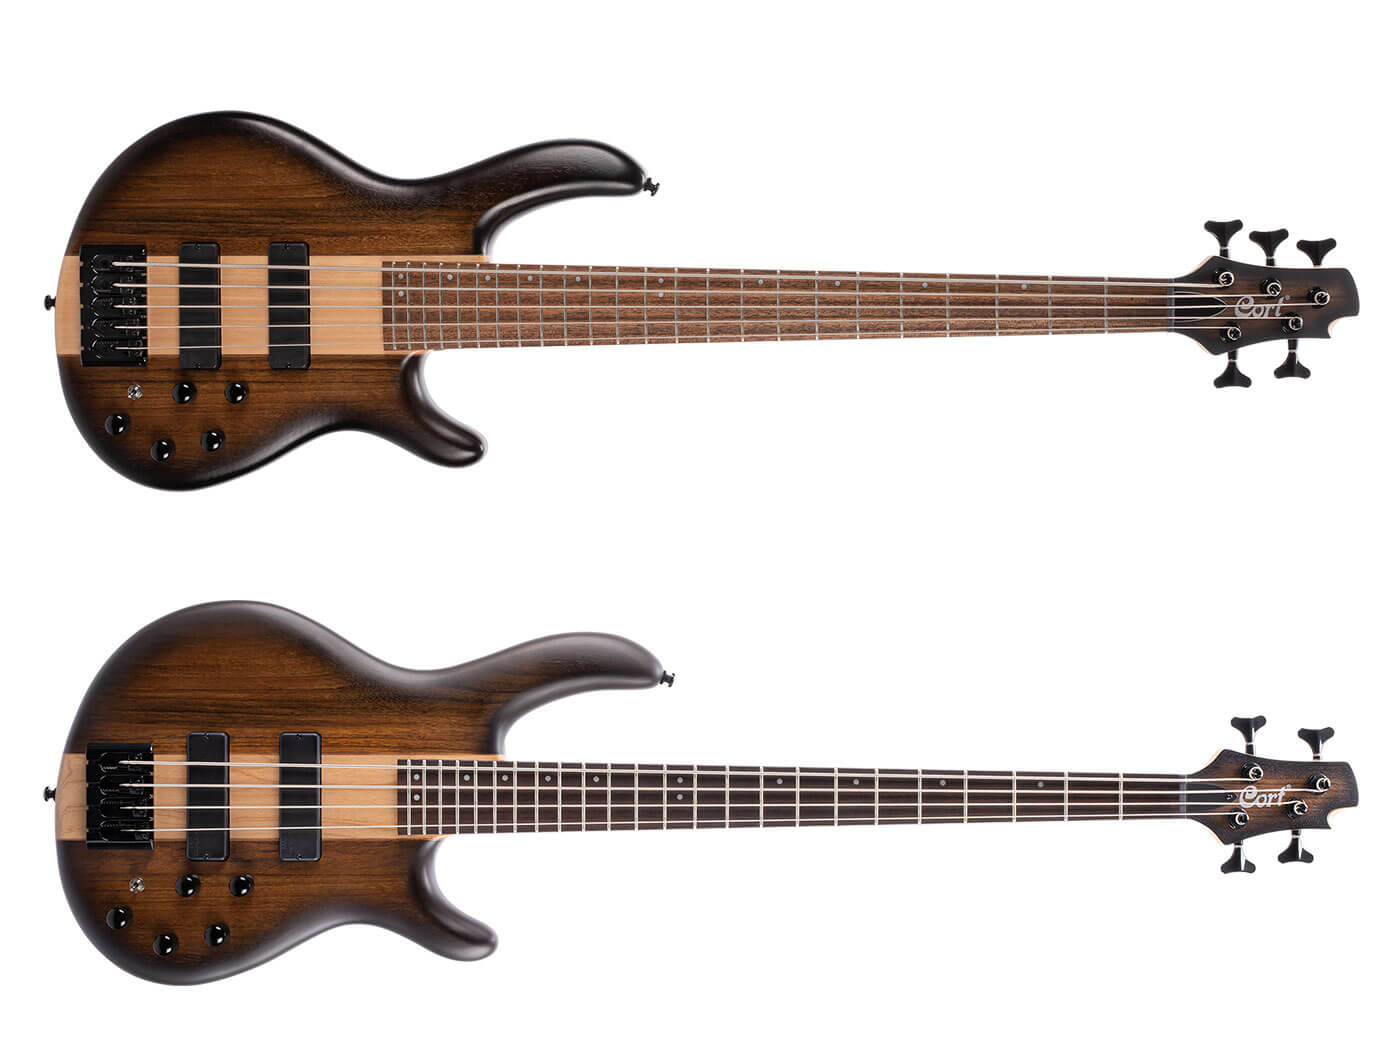 Cort's new C4 and C5 basses